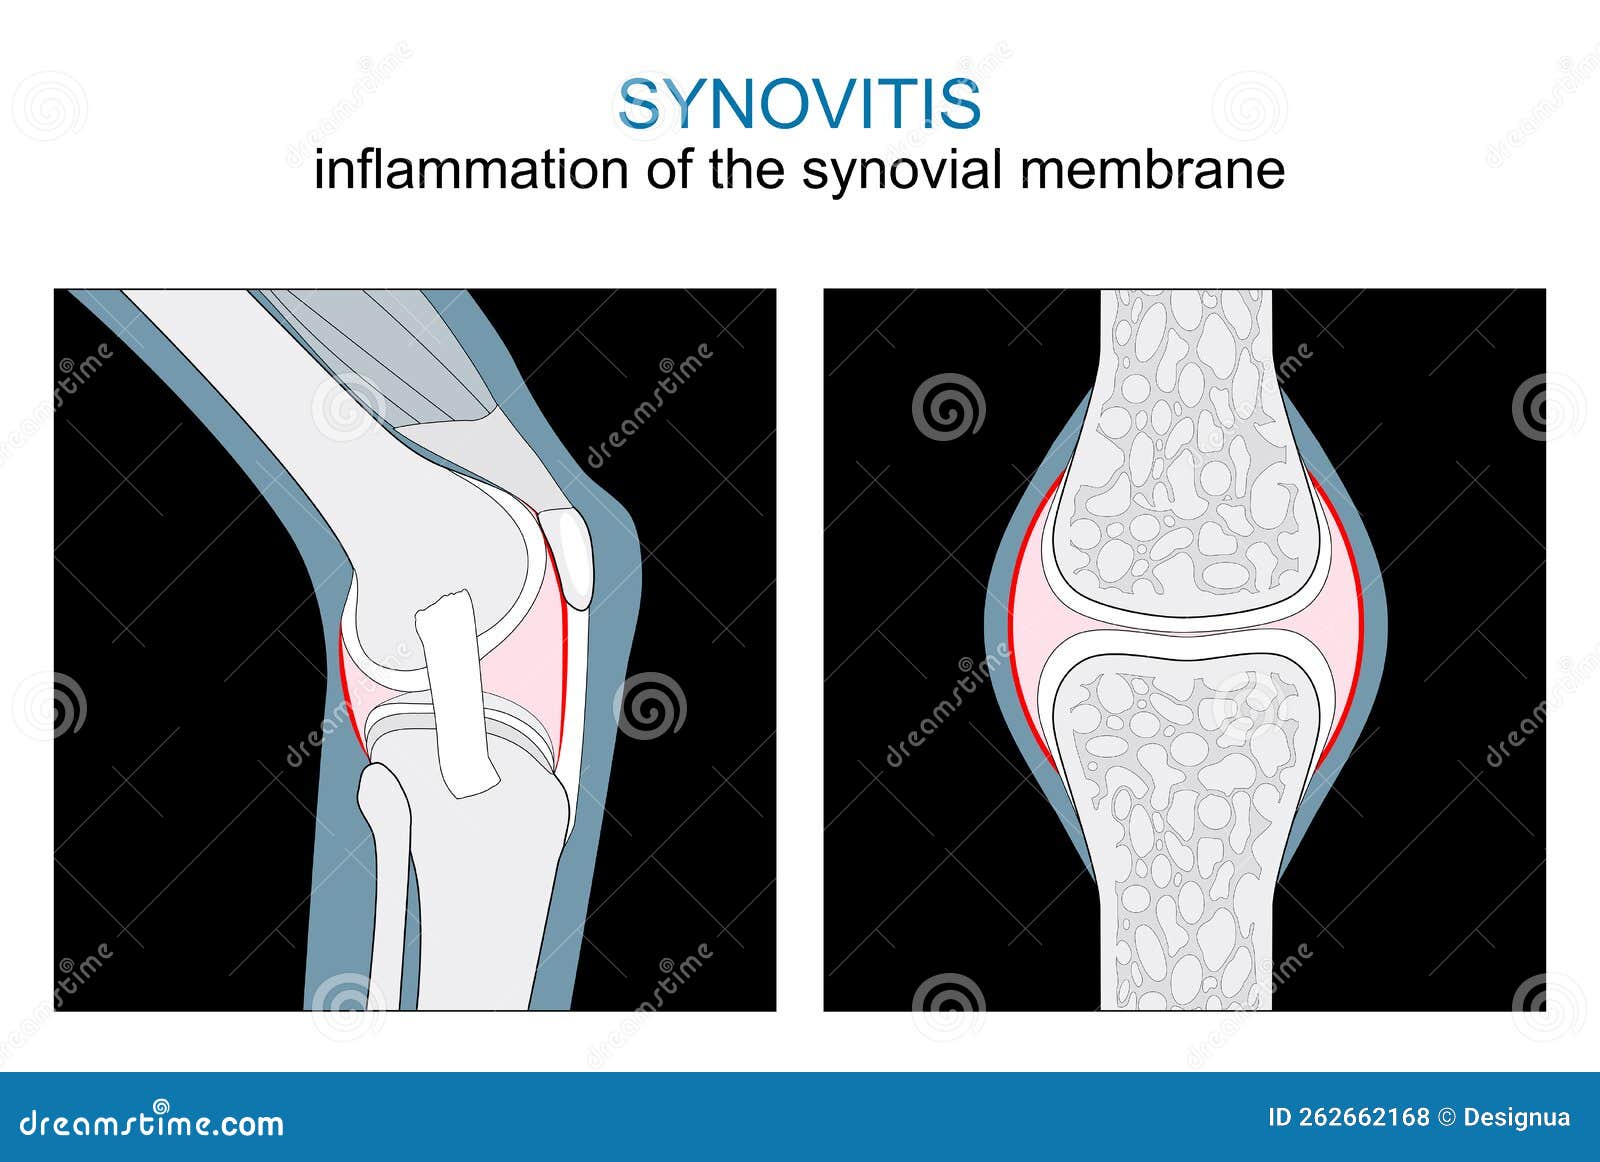 synovitis. inflammation of the synovial membrane. knee and synovial joint